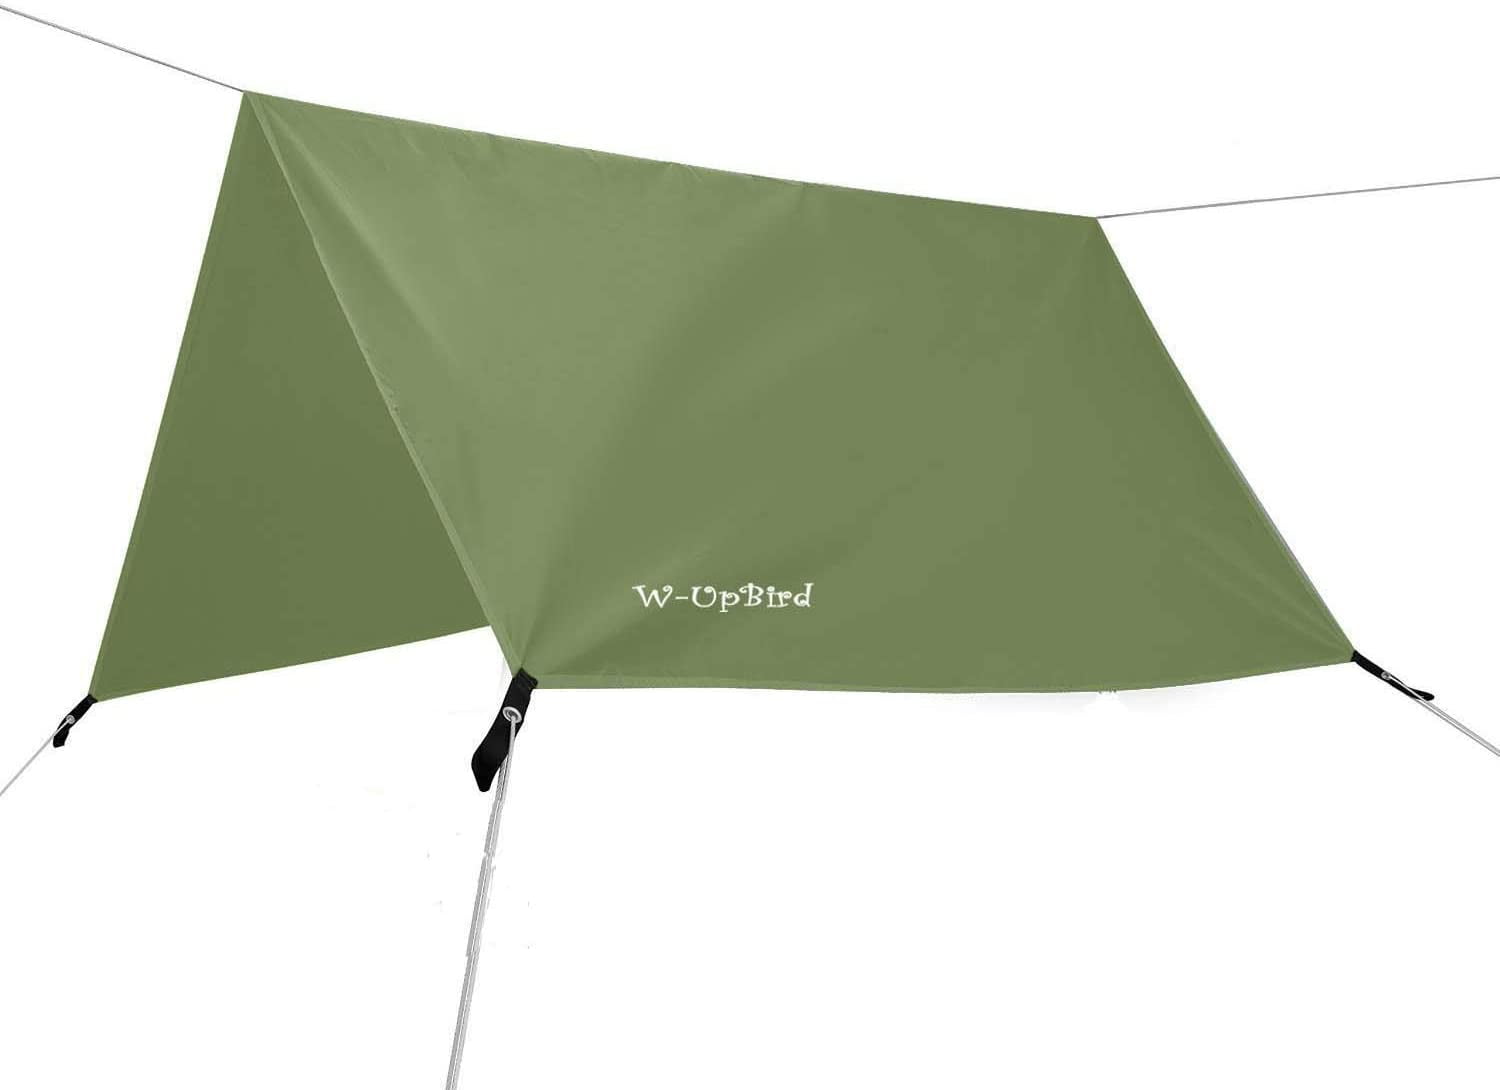 Hiking Mutil-Functional Tent Shelter for Outdoor Travel Picnic Stakes TOMSHOO Waterproof Tent Tarp Rain Fly Hammock Tarp Cover Canopy Picnic Mat Blanket